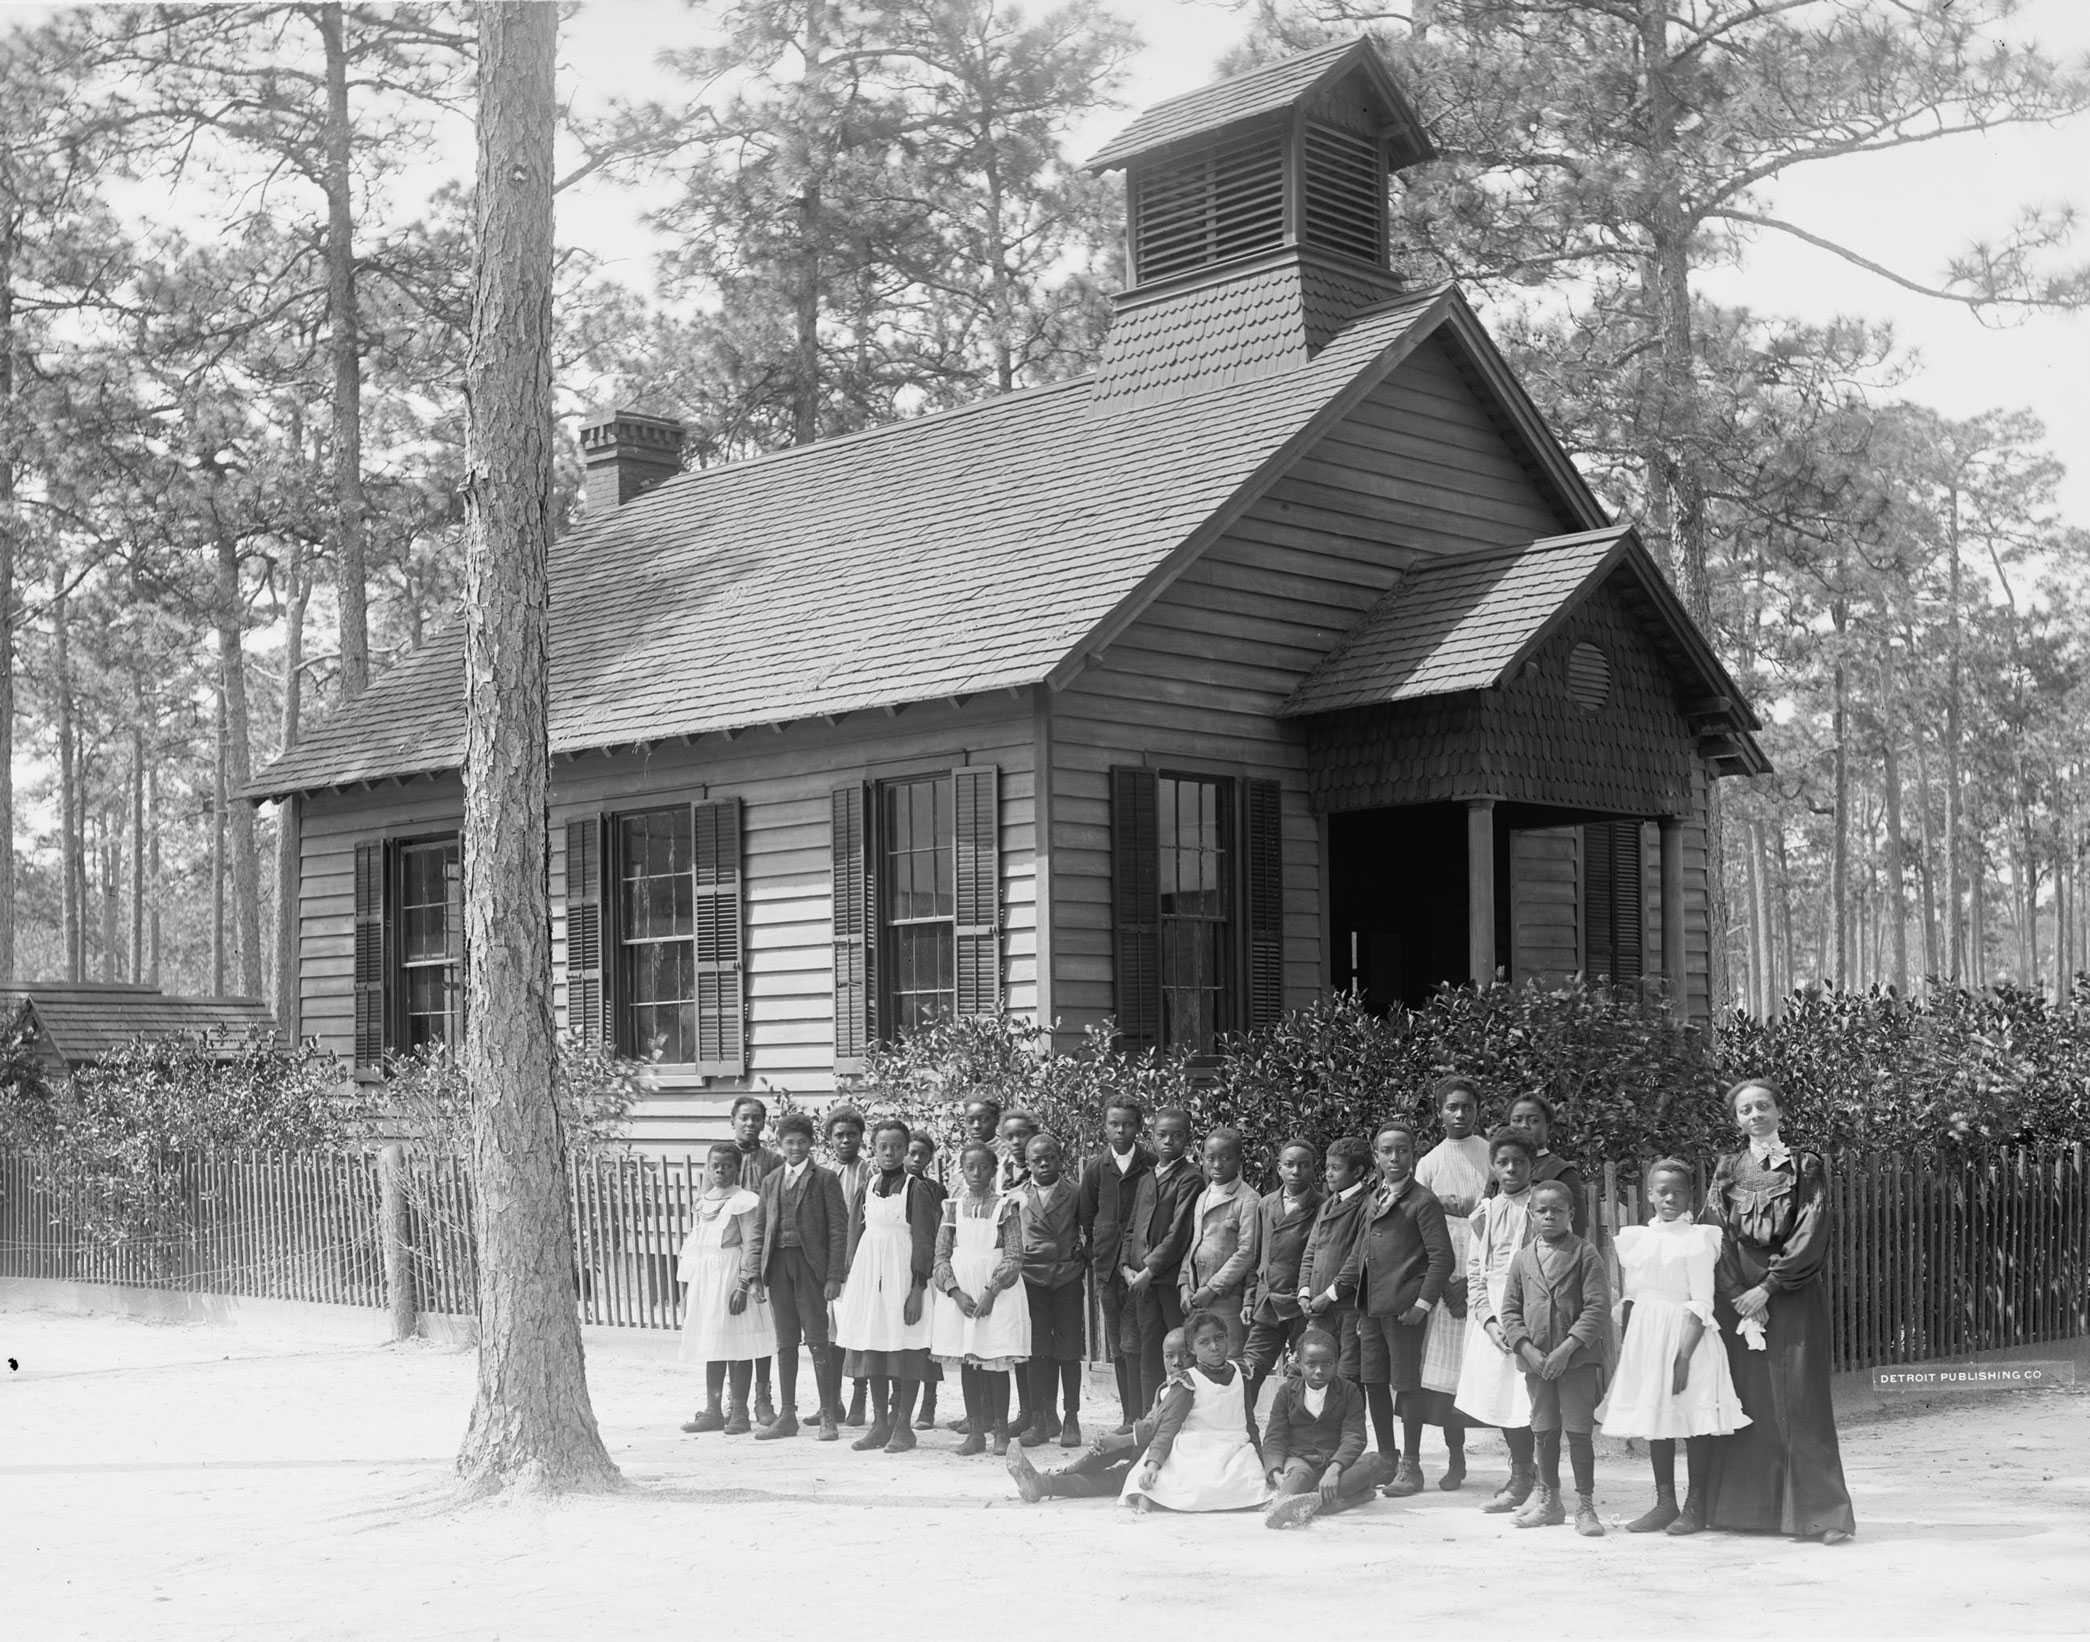 A black and white portrait of a teacher and 20 students standing in front of their school in 1900.